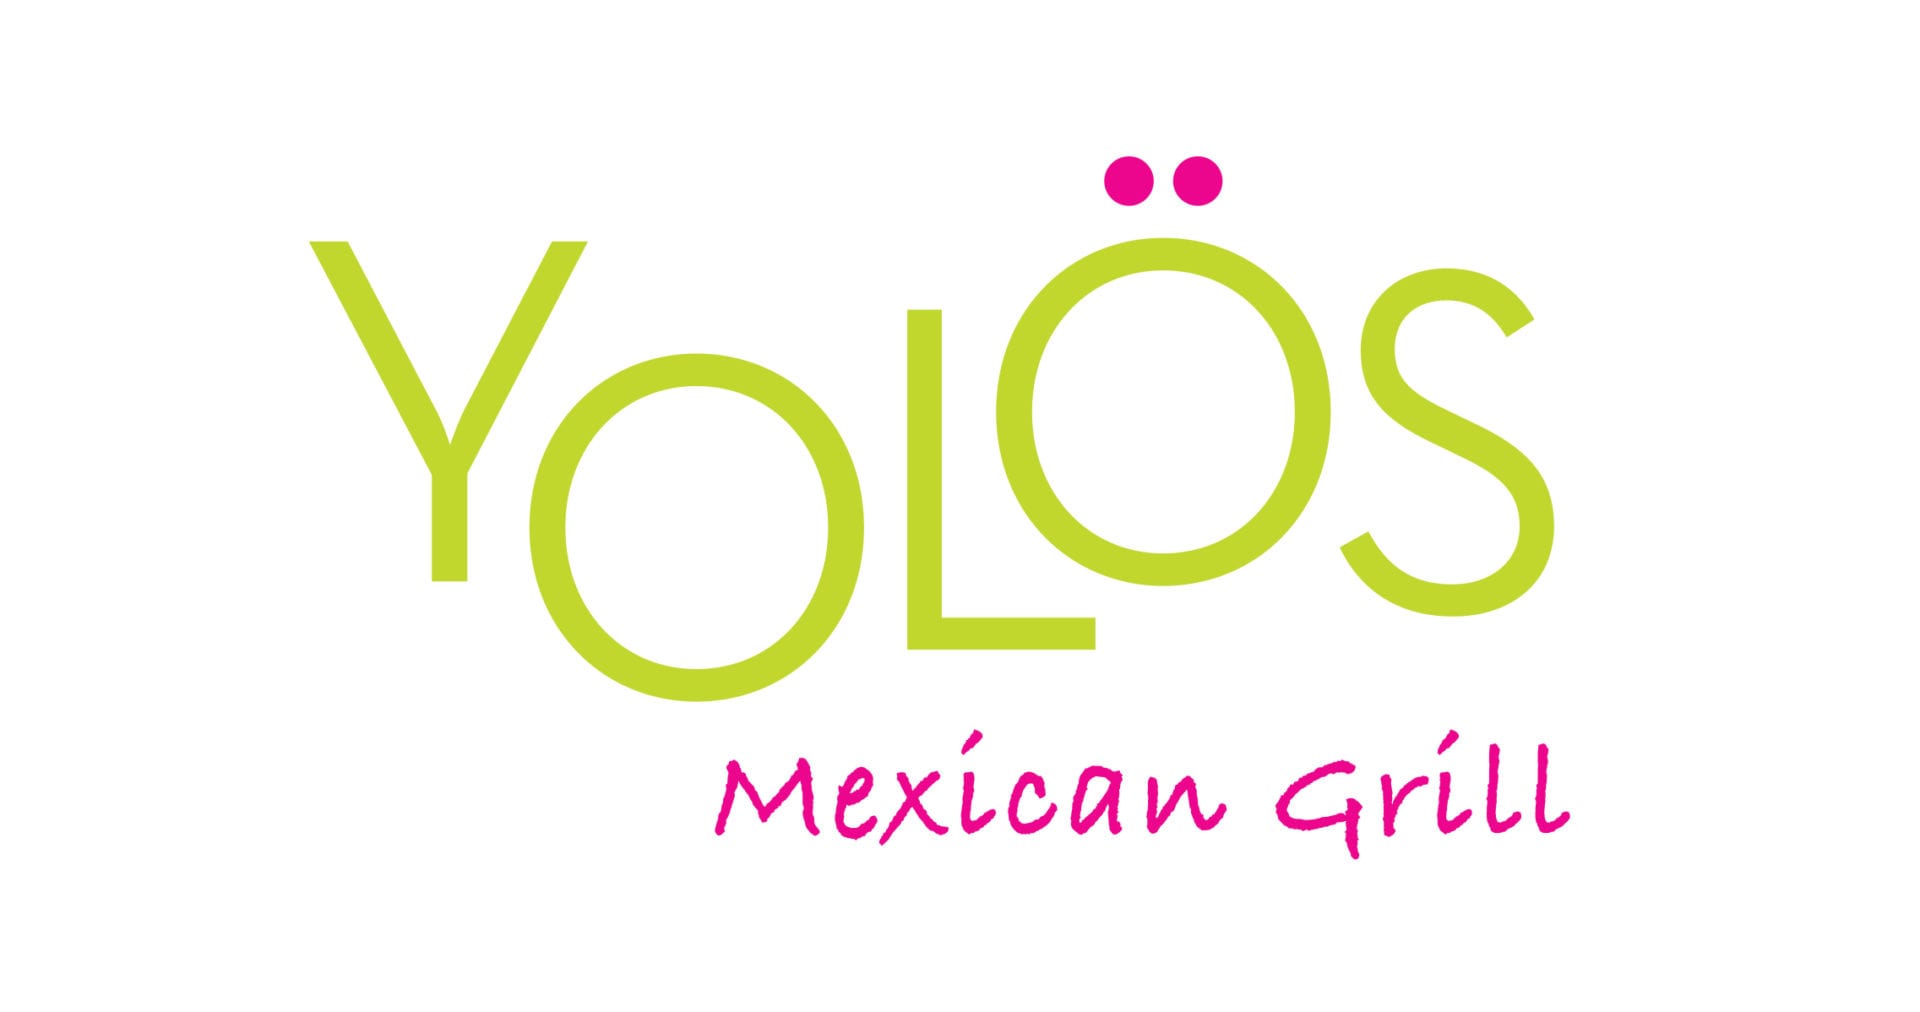 Yolos Mexican Grill logo, designed by Canyon Creative